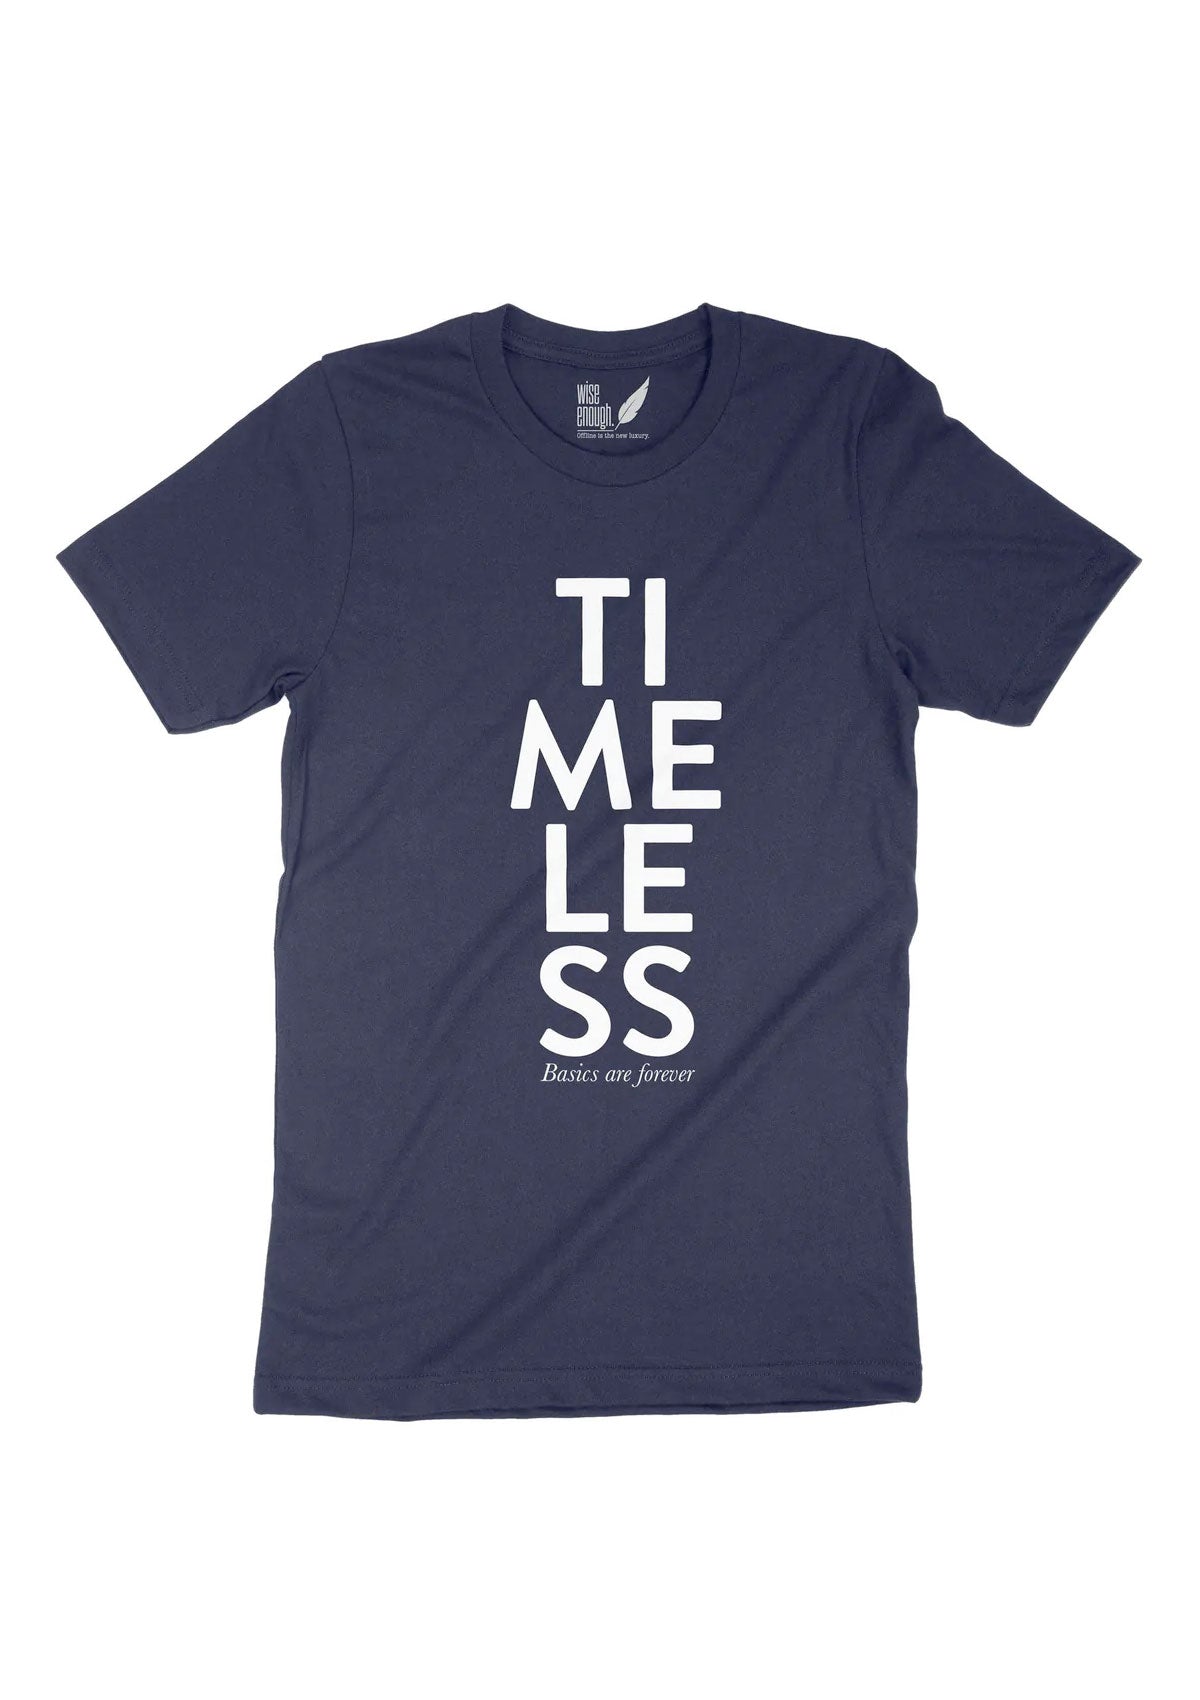 T-Shirt Timeless - wise enough